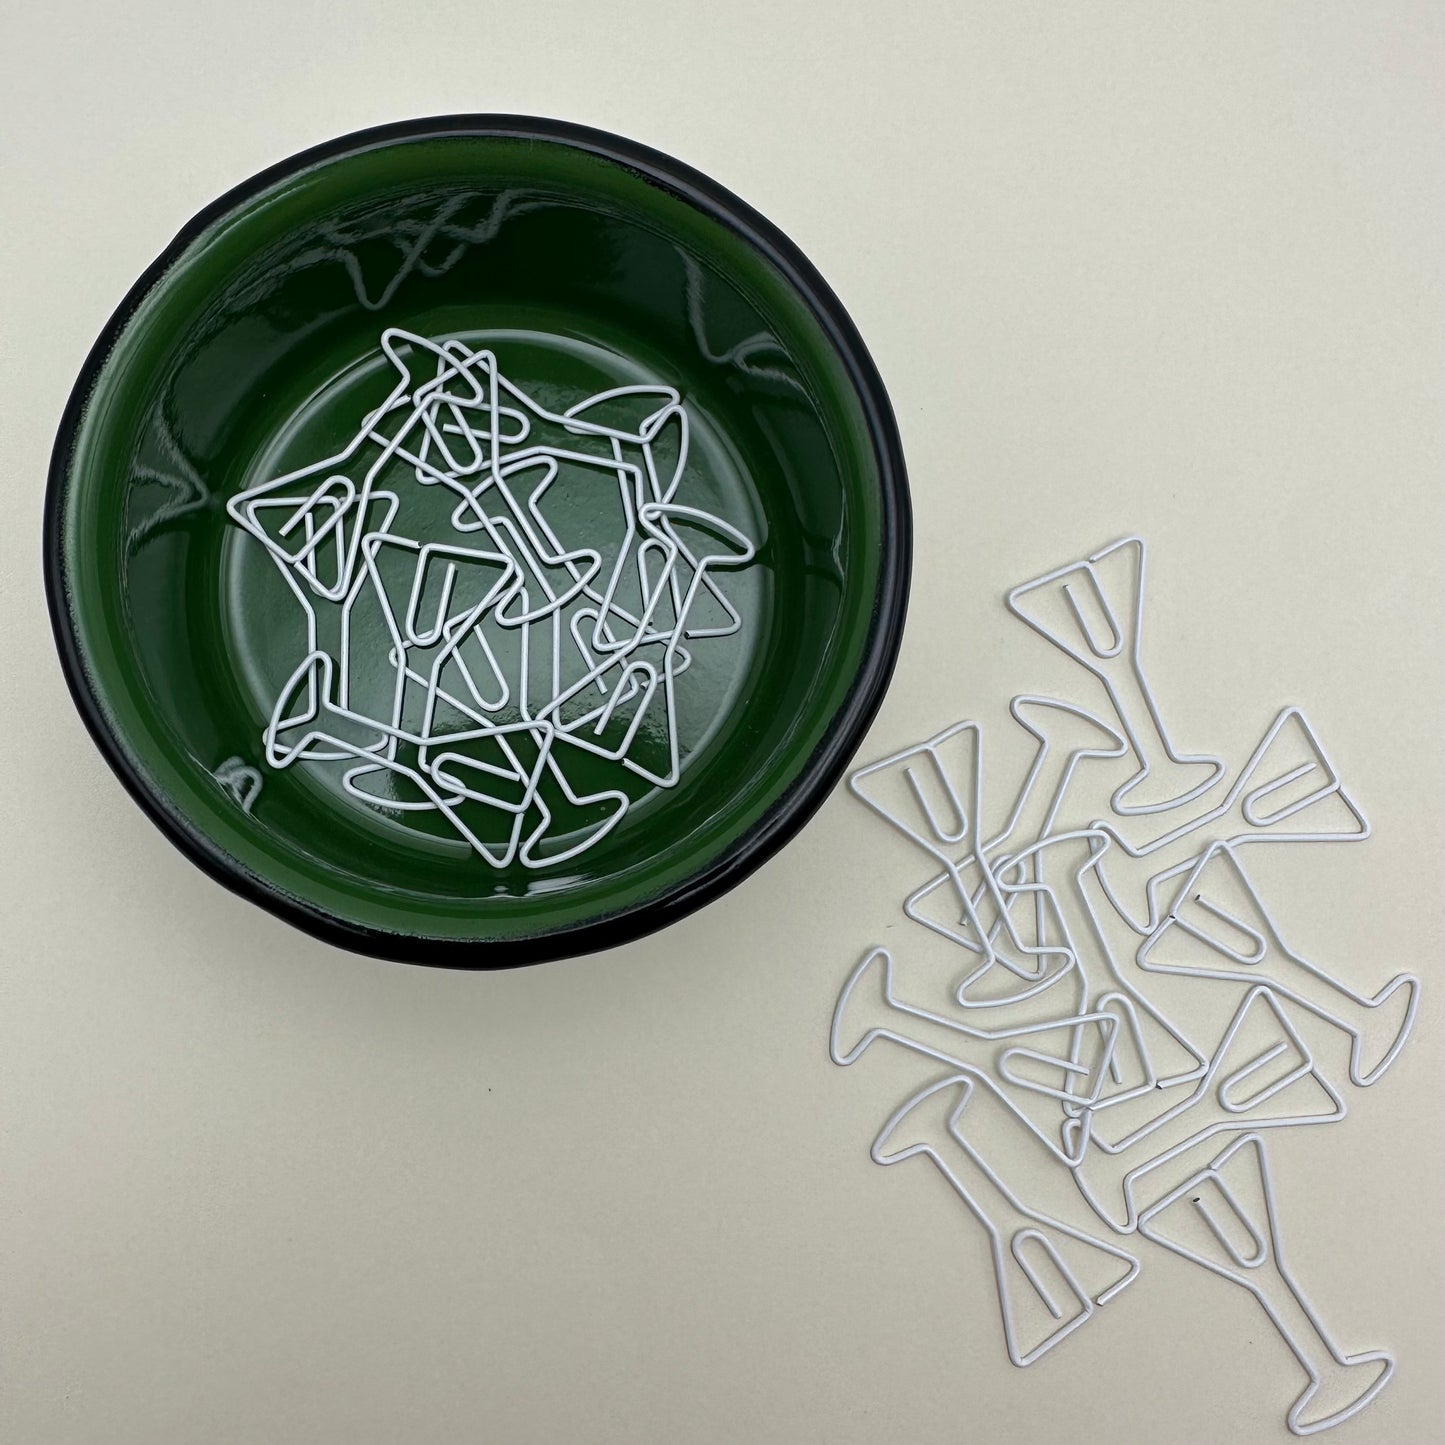 a pile of martini paperclips on the table and in a green ramekin.